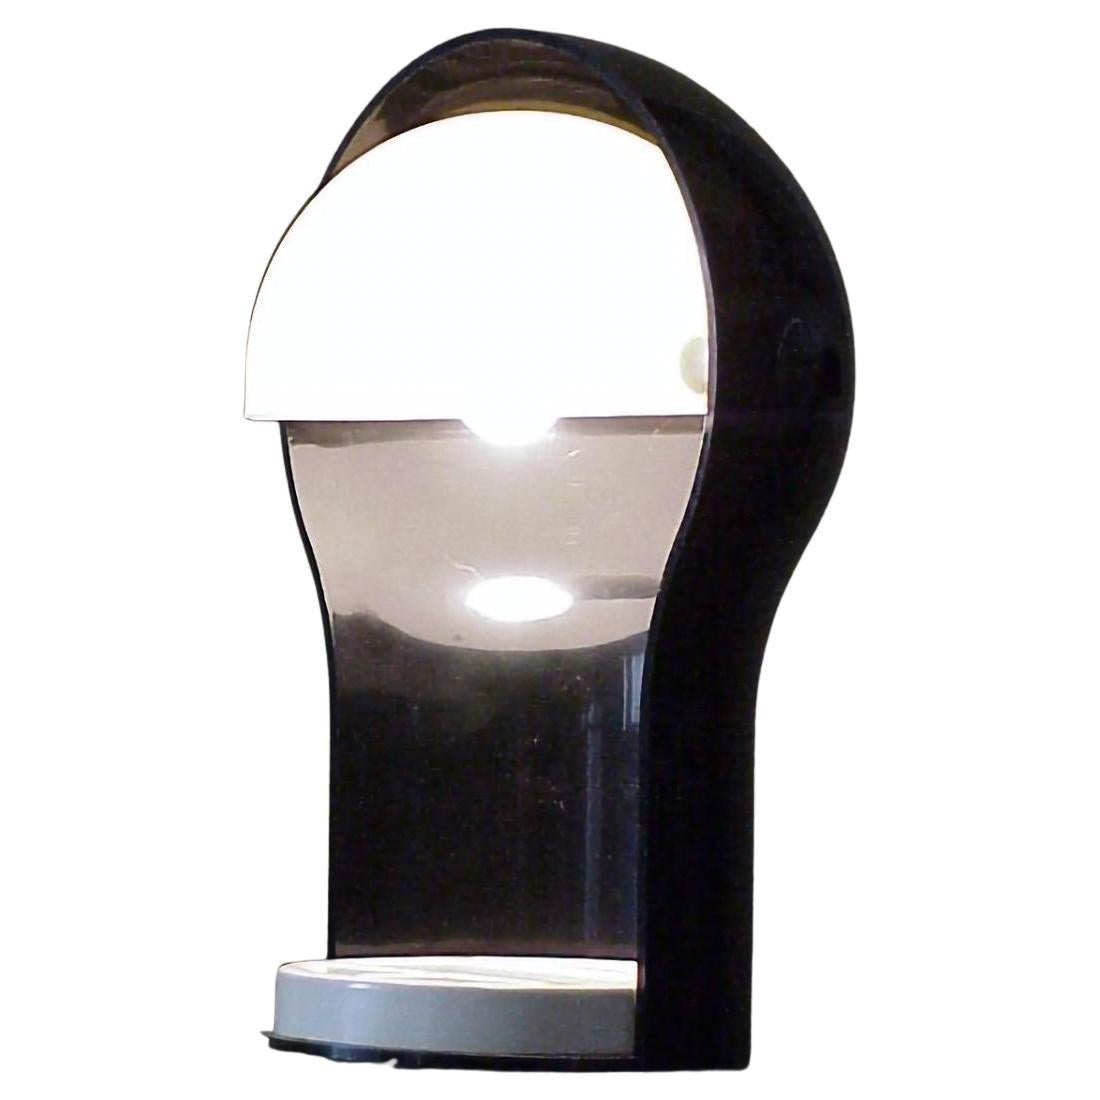 Vintage Telegono Table Lamp by Vico Magistretti Design for Artemide Italy 1969 For Sale